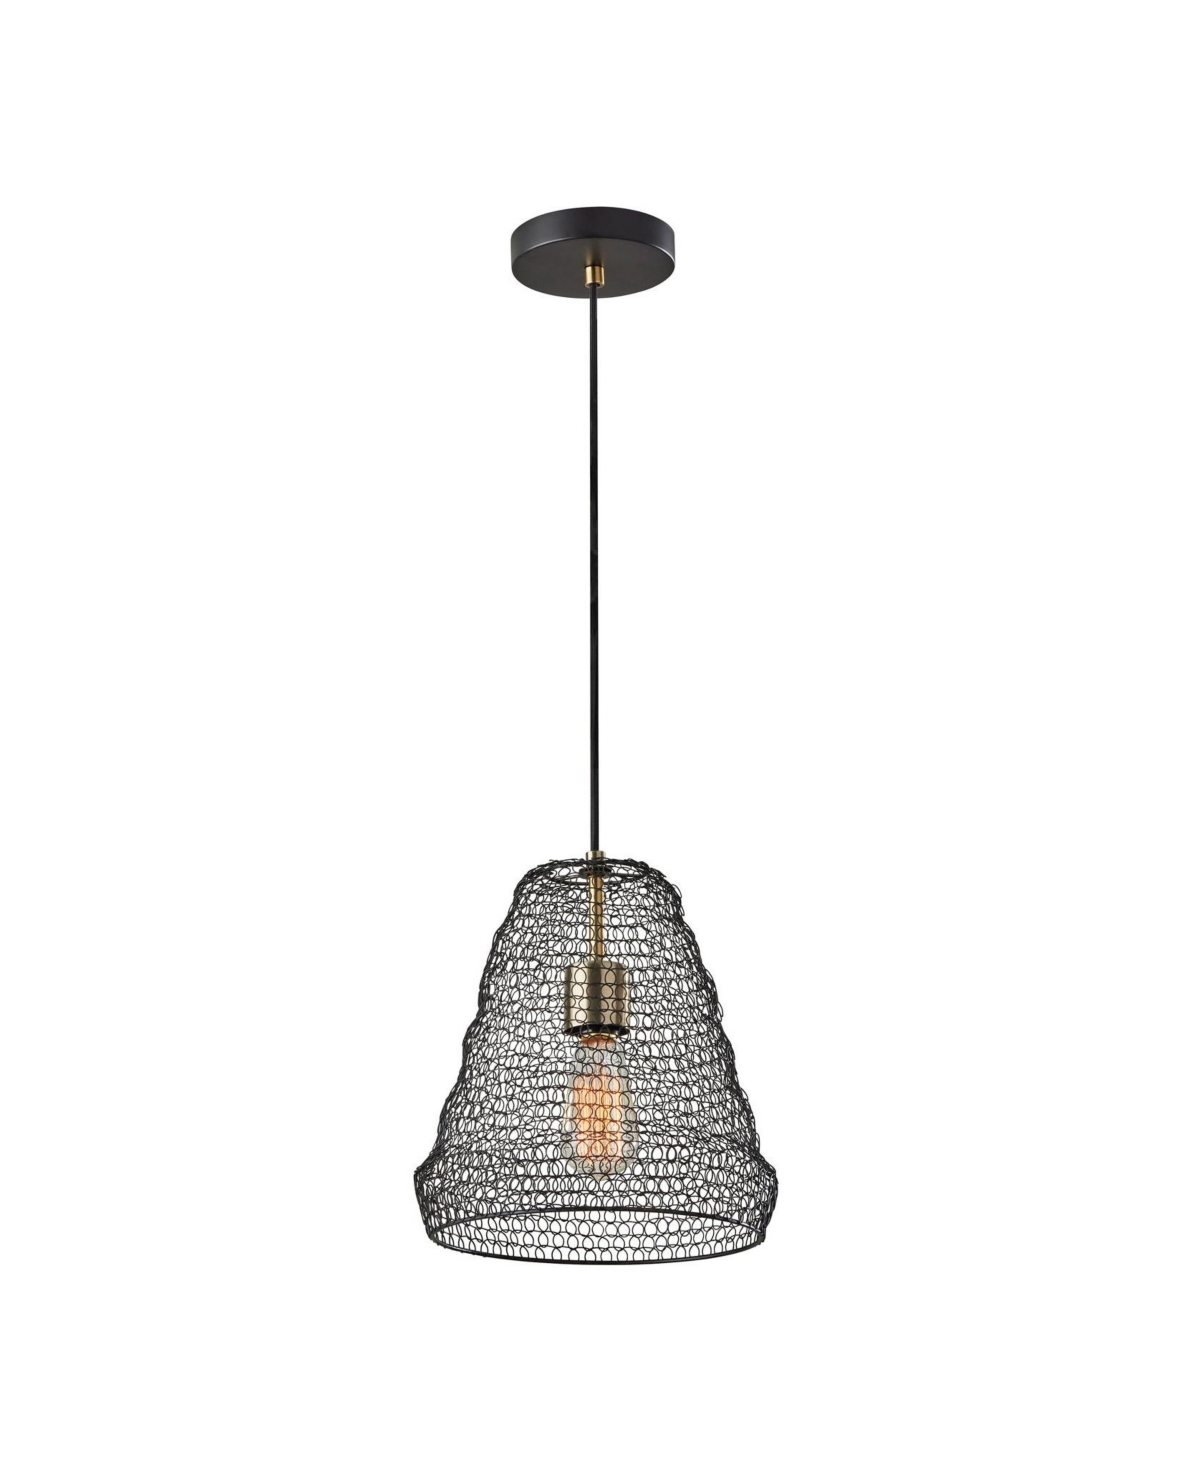 Adesso Sheridan Pendant Lamp In Black With Antique-like Brass Accents